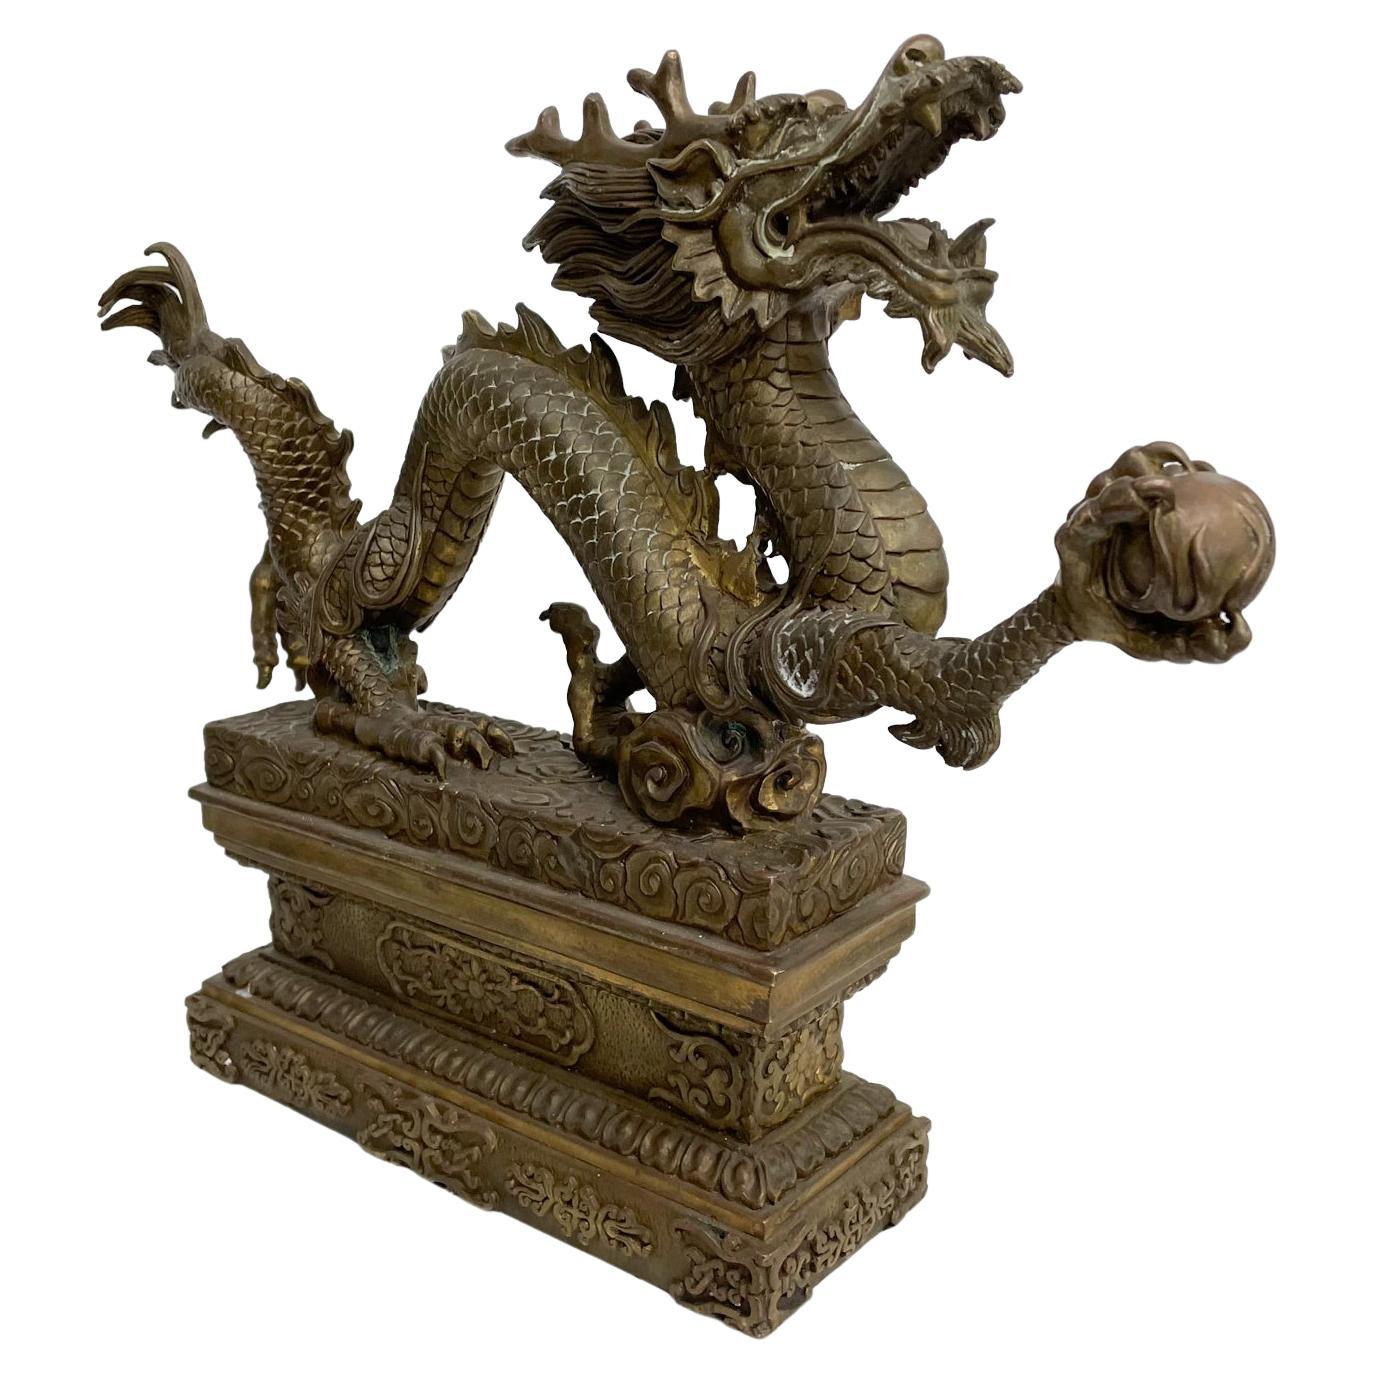 Chinese Dragon sculpture
Powerful Chinese Feng shui Dragon with Ball Bronze Sculpture Ornate Relief
Made in cast bronze sculpture of a Chinese Dragon holding a ball.
A must for the Feng Shui fanatics who believe in the power of the golden